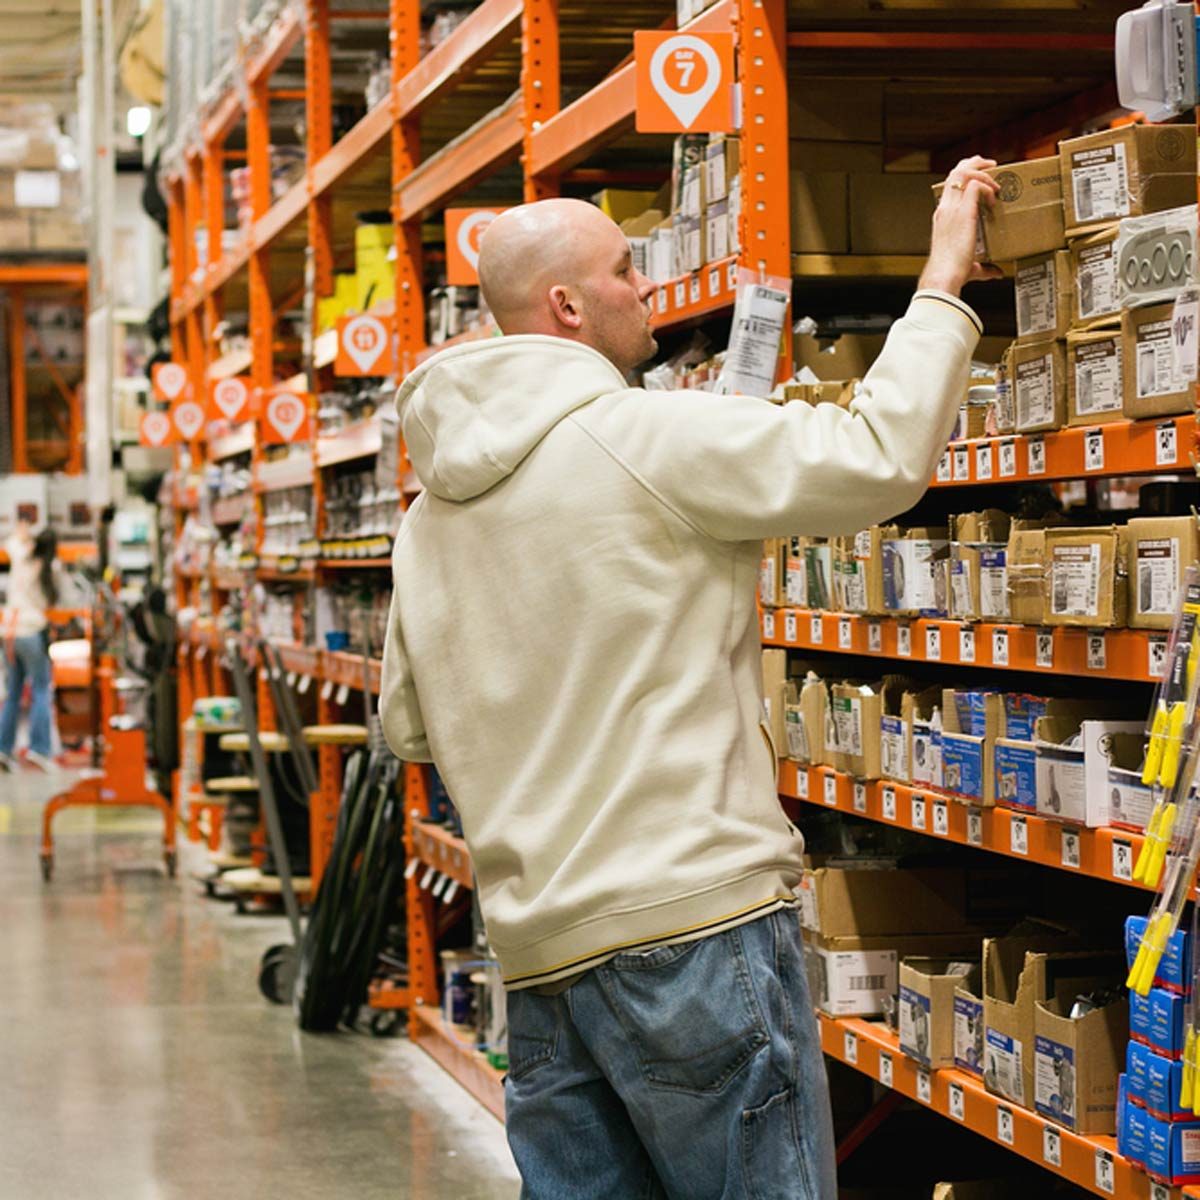 14 Things Home Depot Employees Won't Tell You